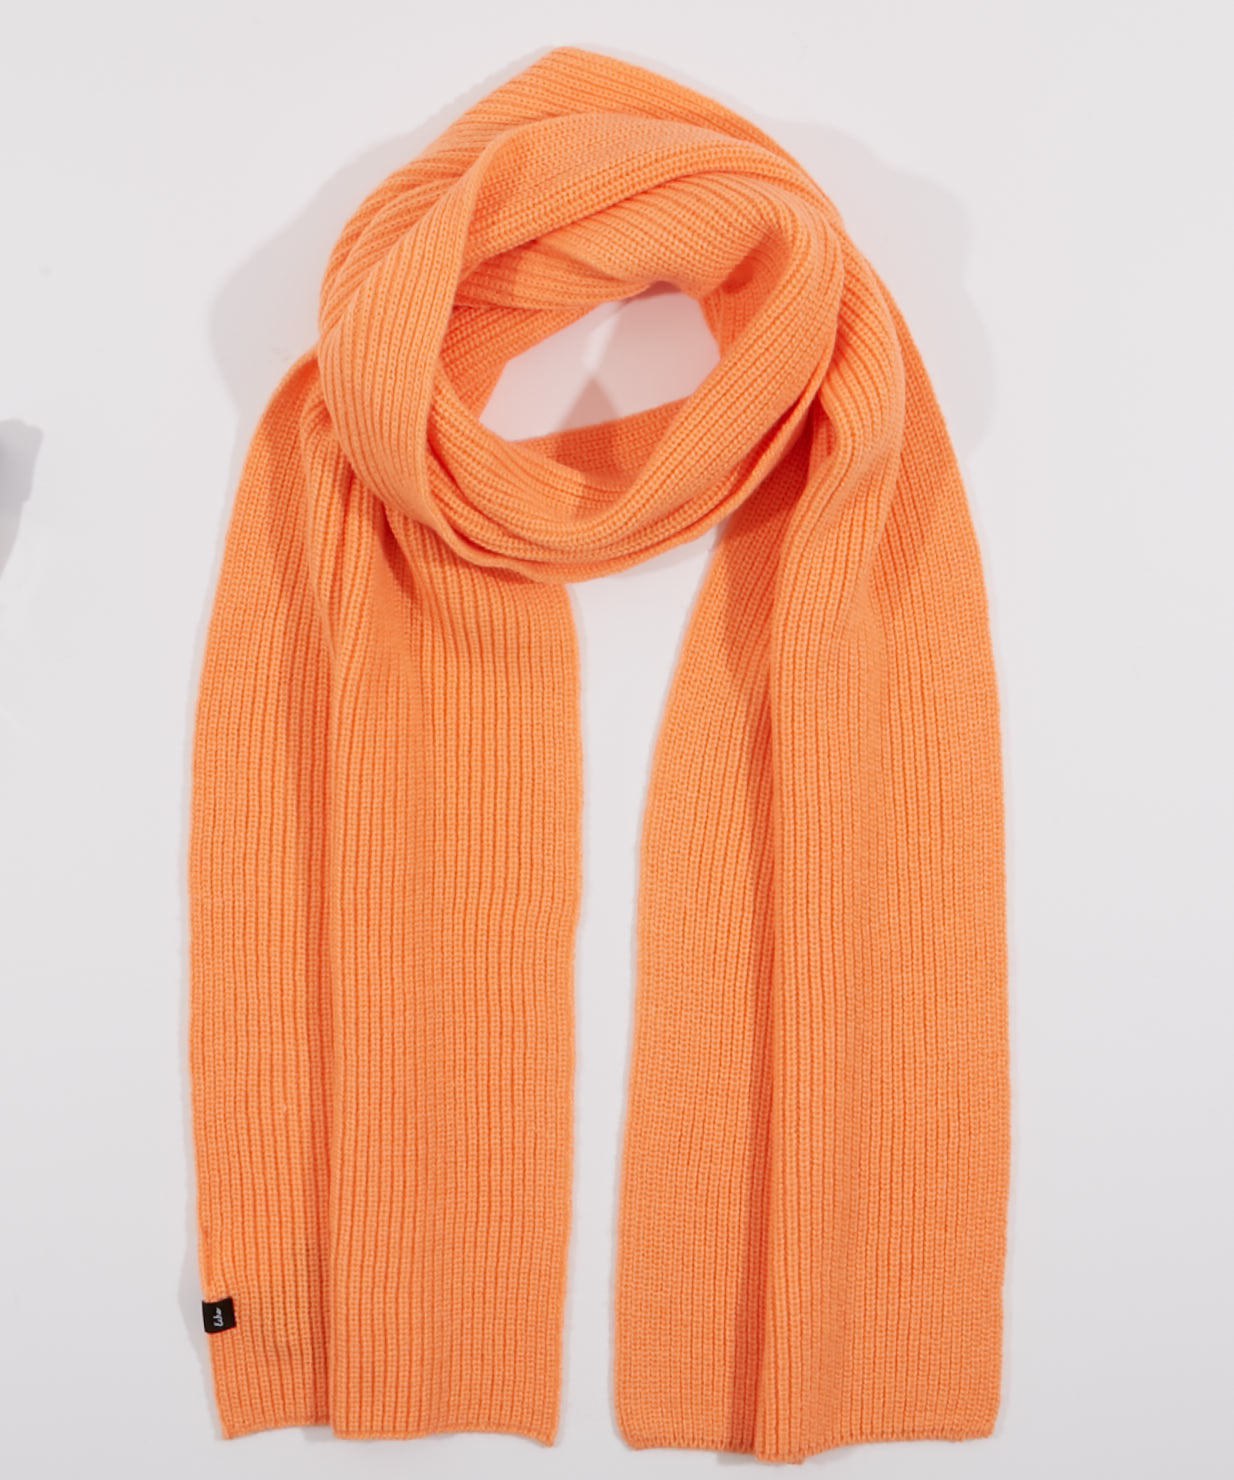 Radiant Scarf in color Peach Blush